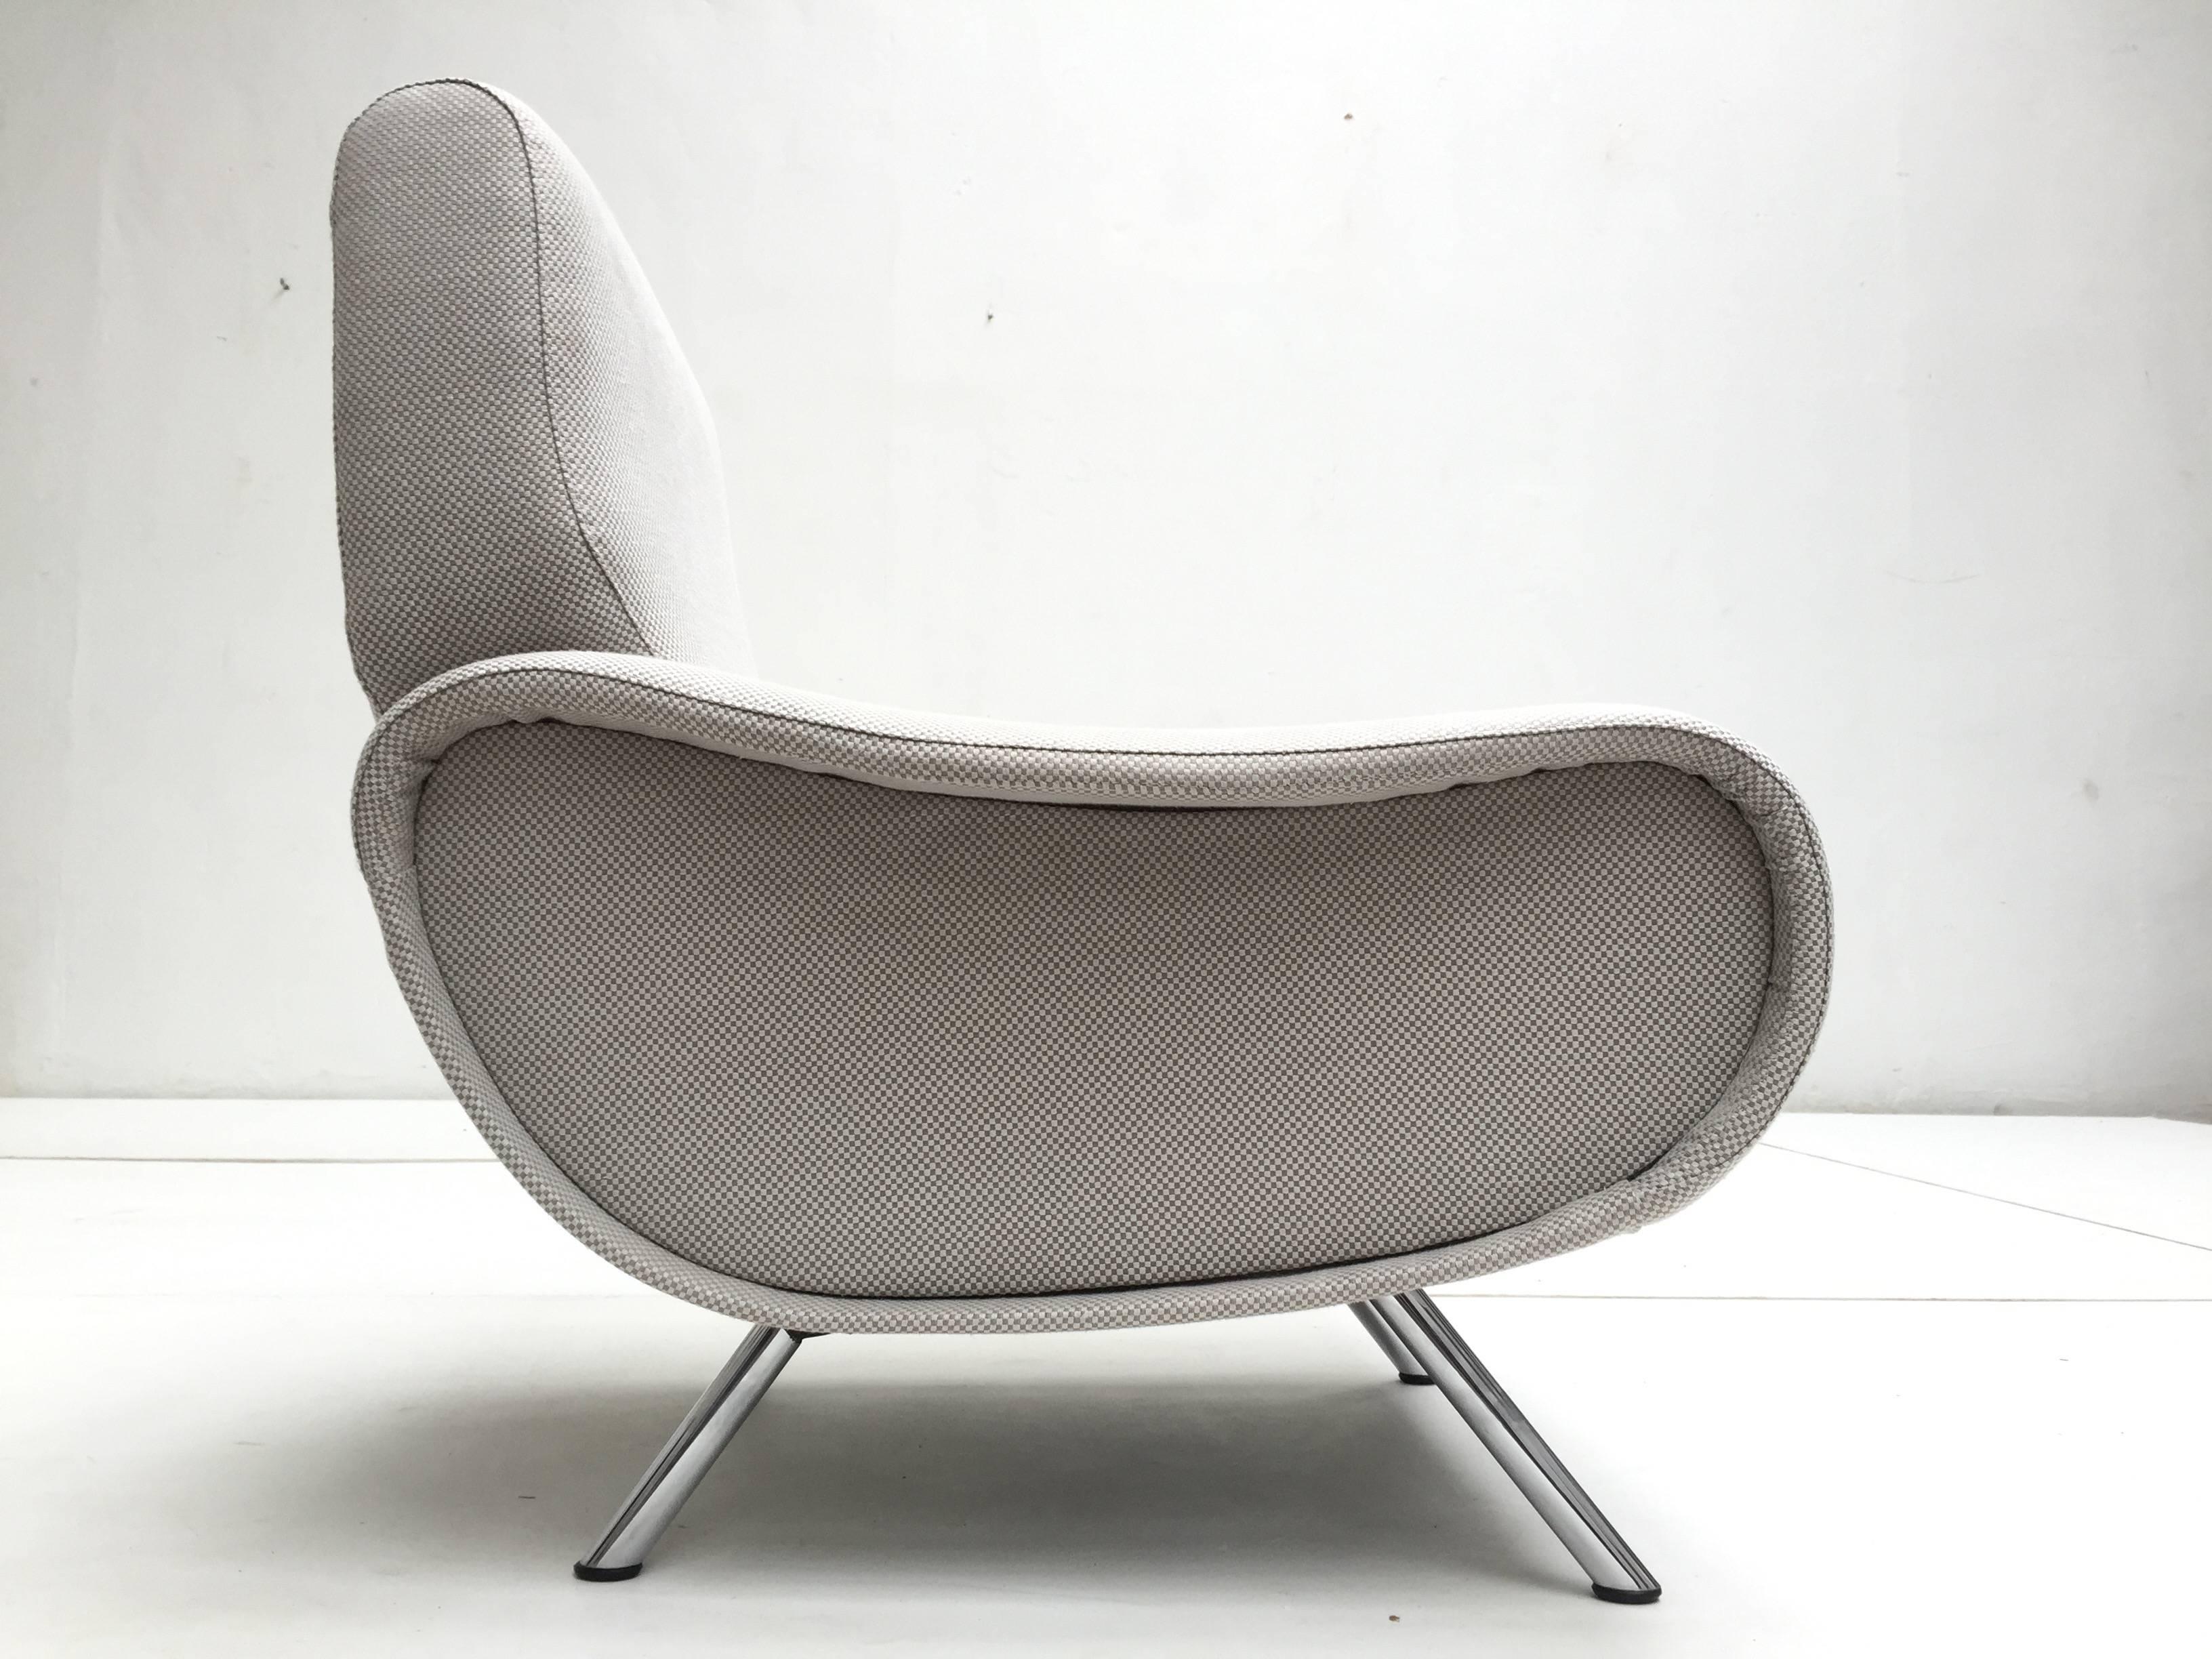 Plated Restored Silver Op-Art Lady Chair by Marco Zanuso for Arflex, Italy, 1951